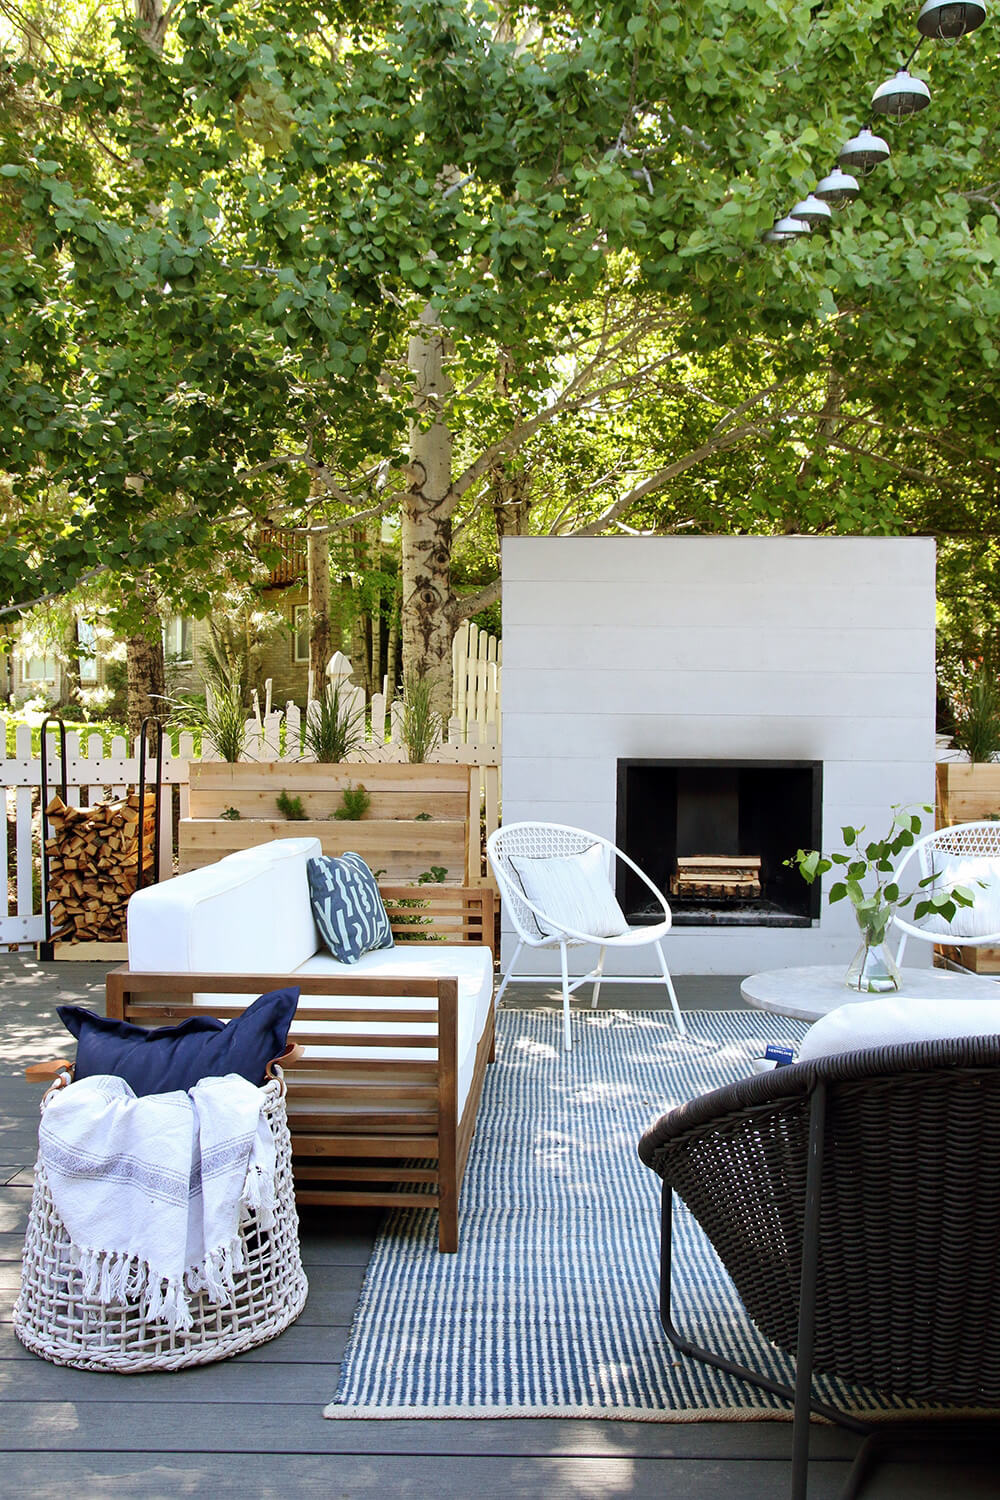 Choosing the right furniture for your backyard